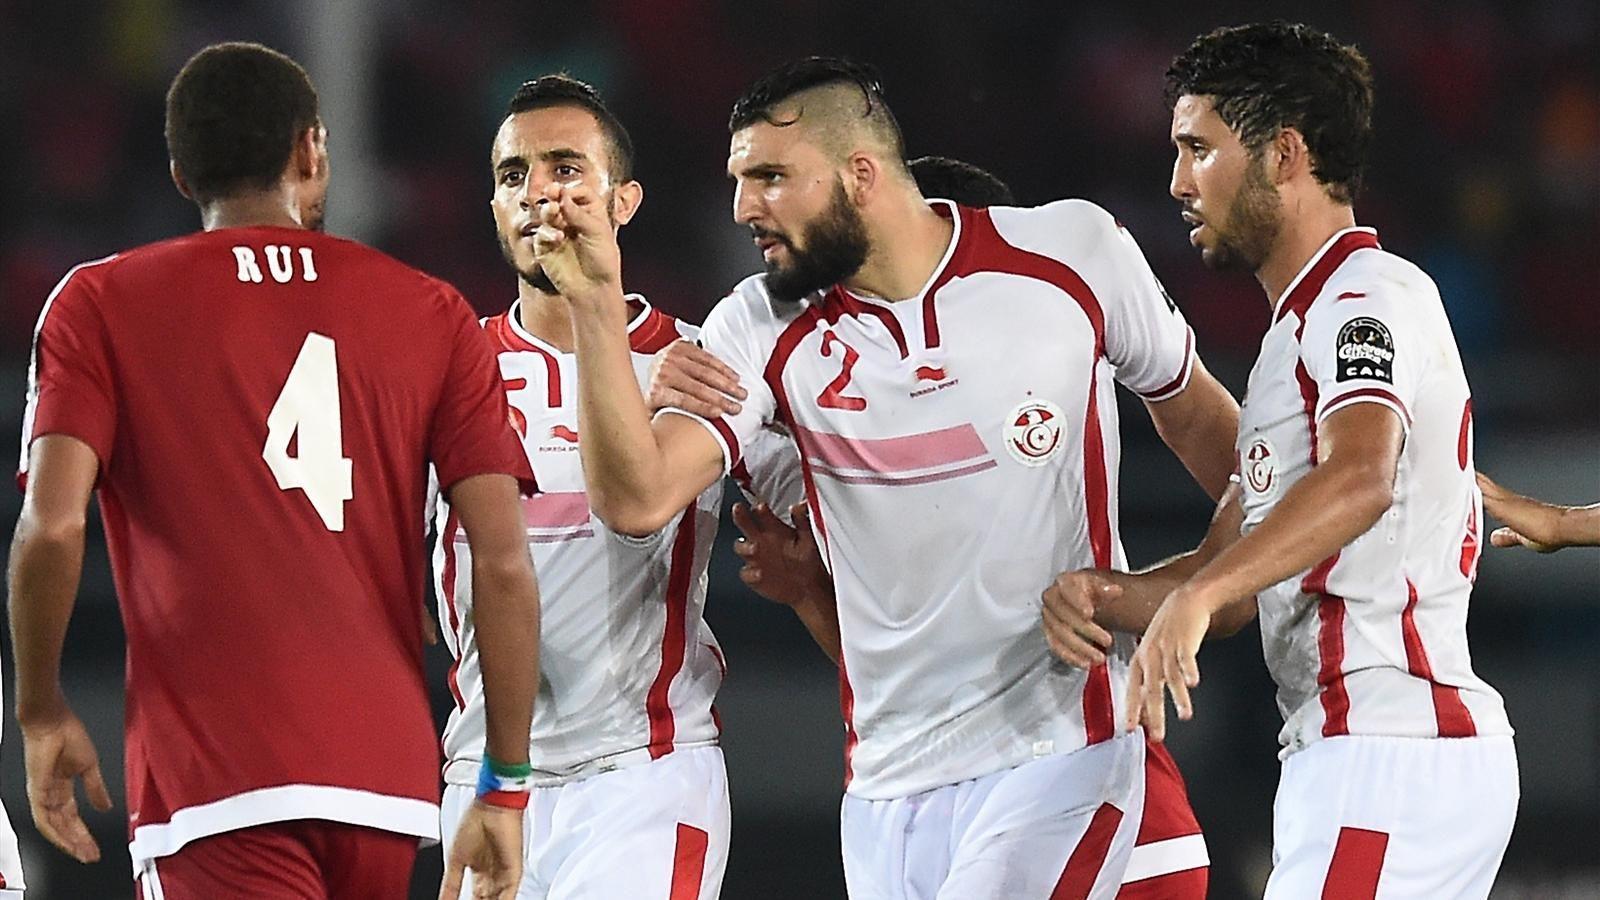 Tunisia clear to play in 2017 African Nations Cup qualifiers